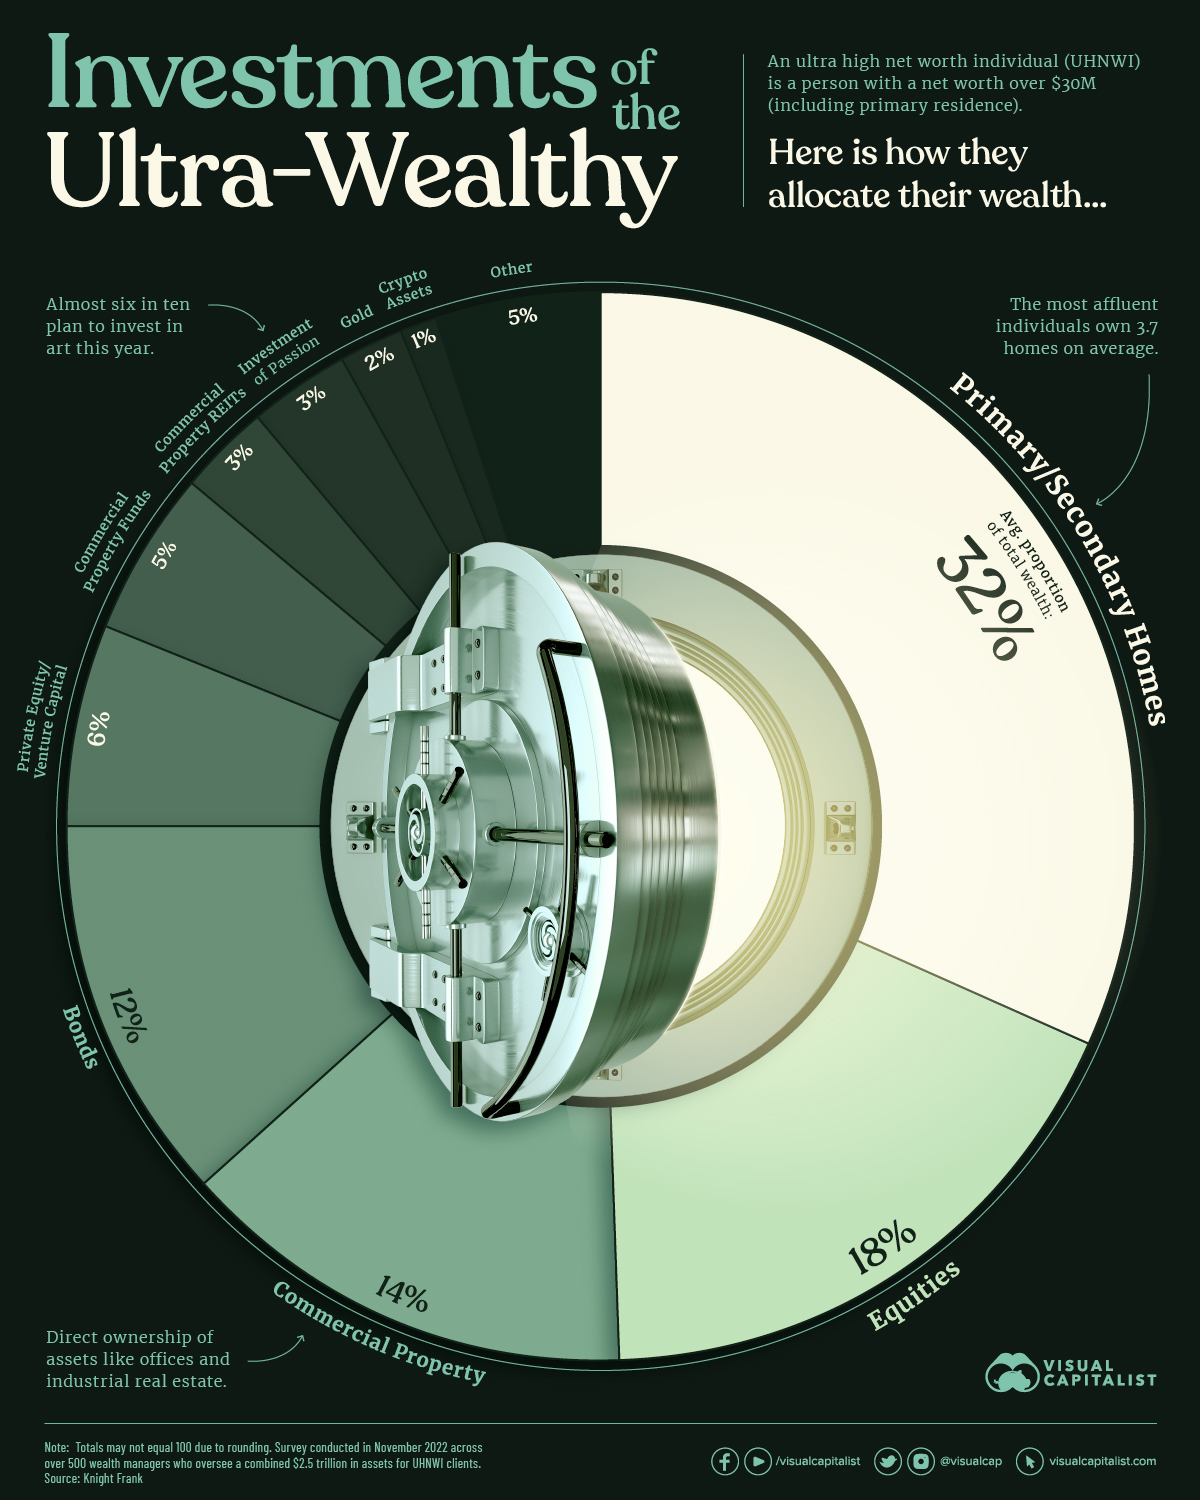 Visualizing Investments of the Ultra-Wealthy